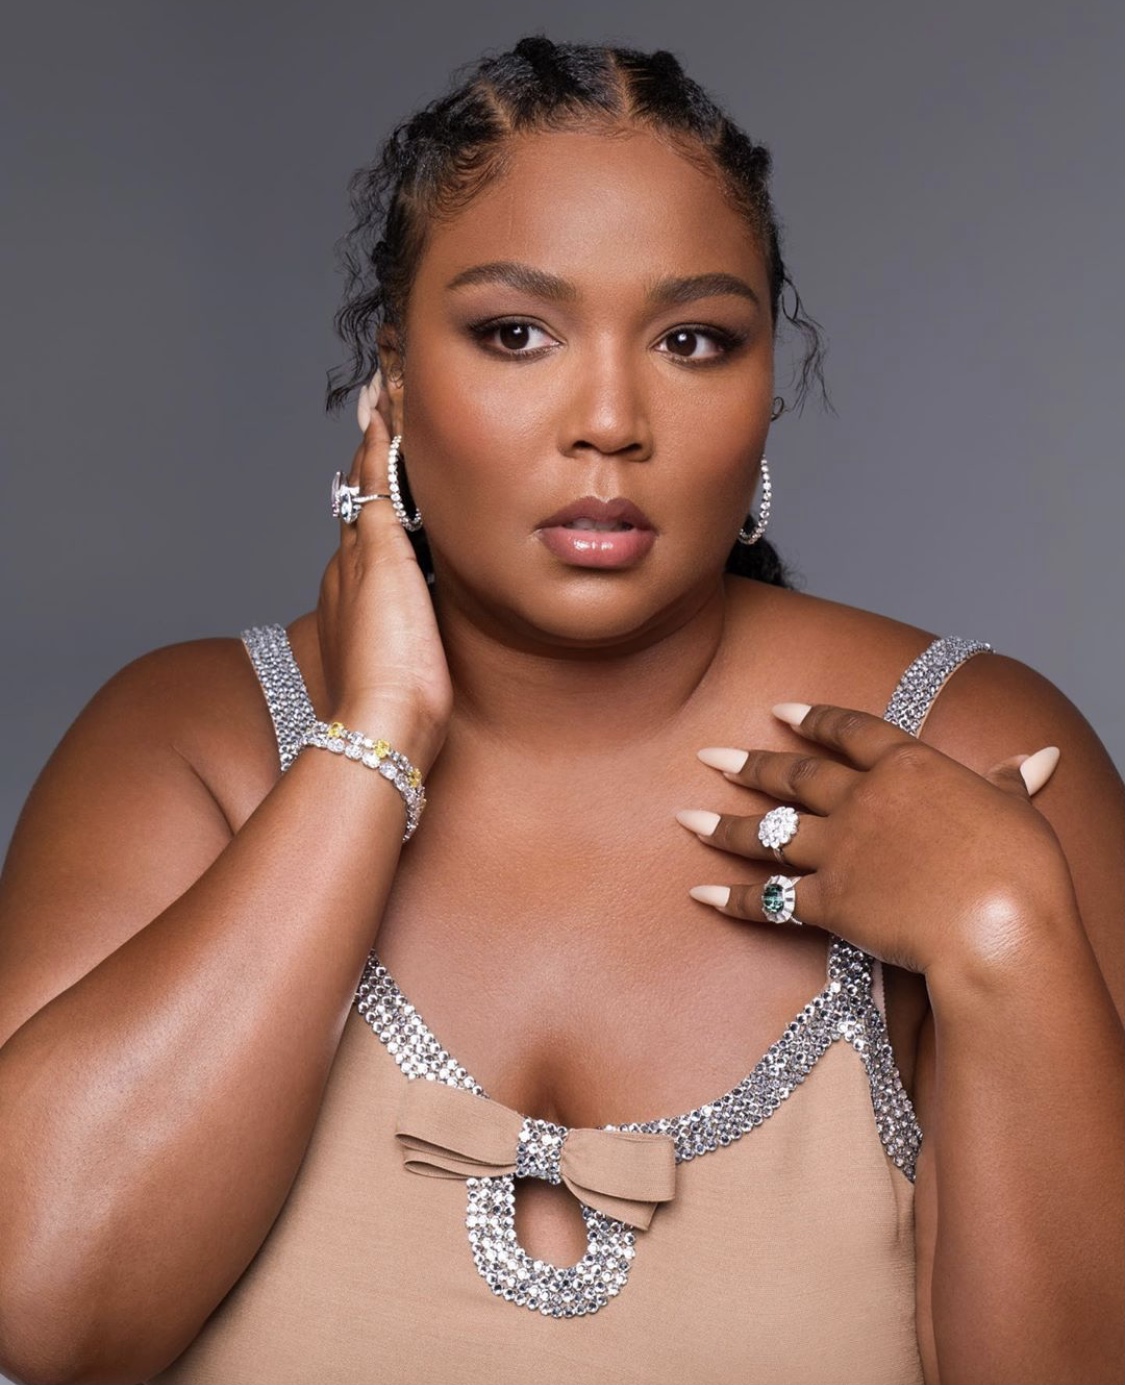 Lizzo-Beating-Vogue-magazine-October-issue